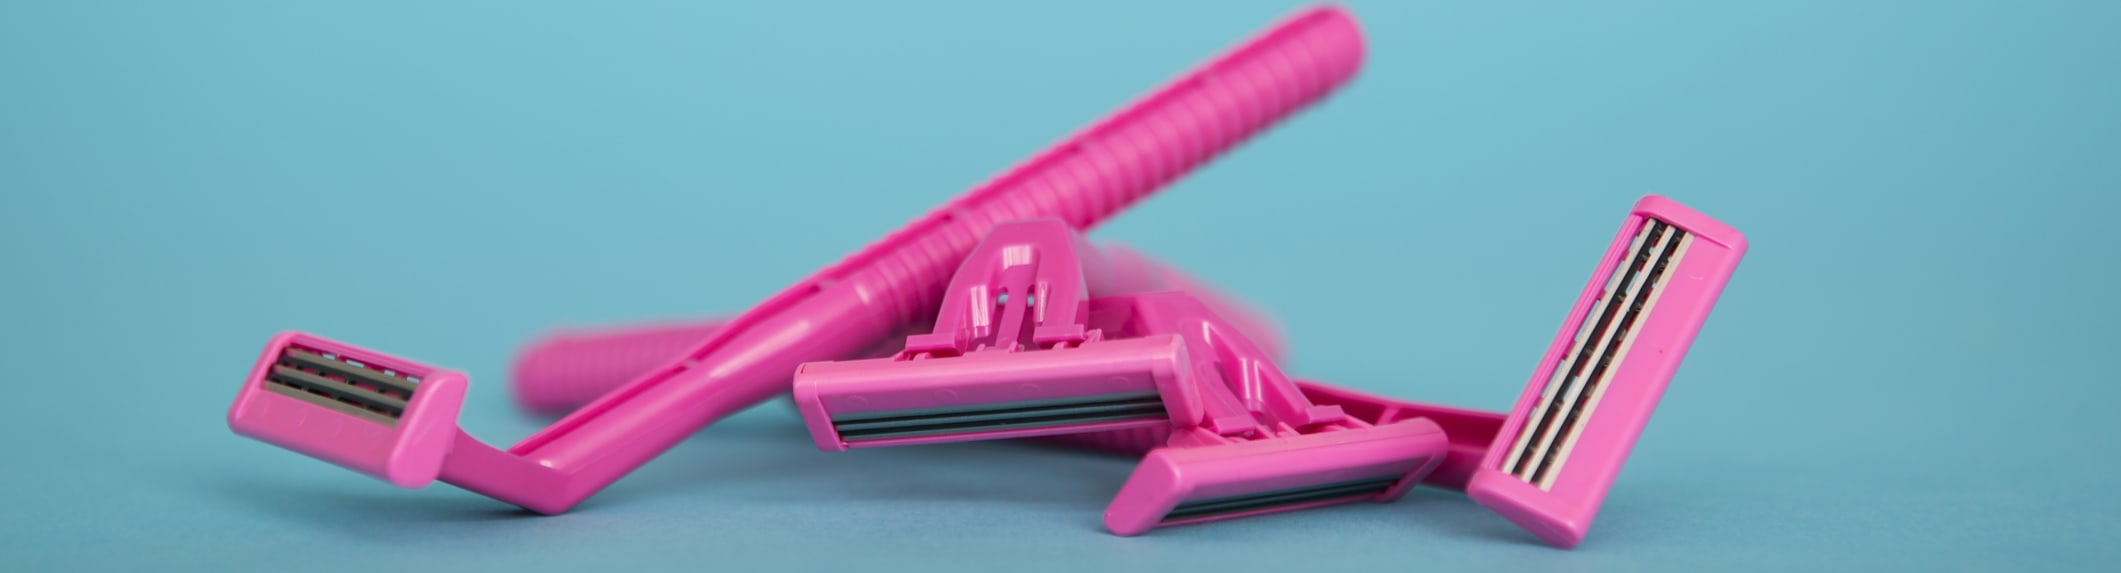 Pink razors on a blue background